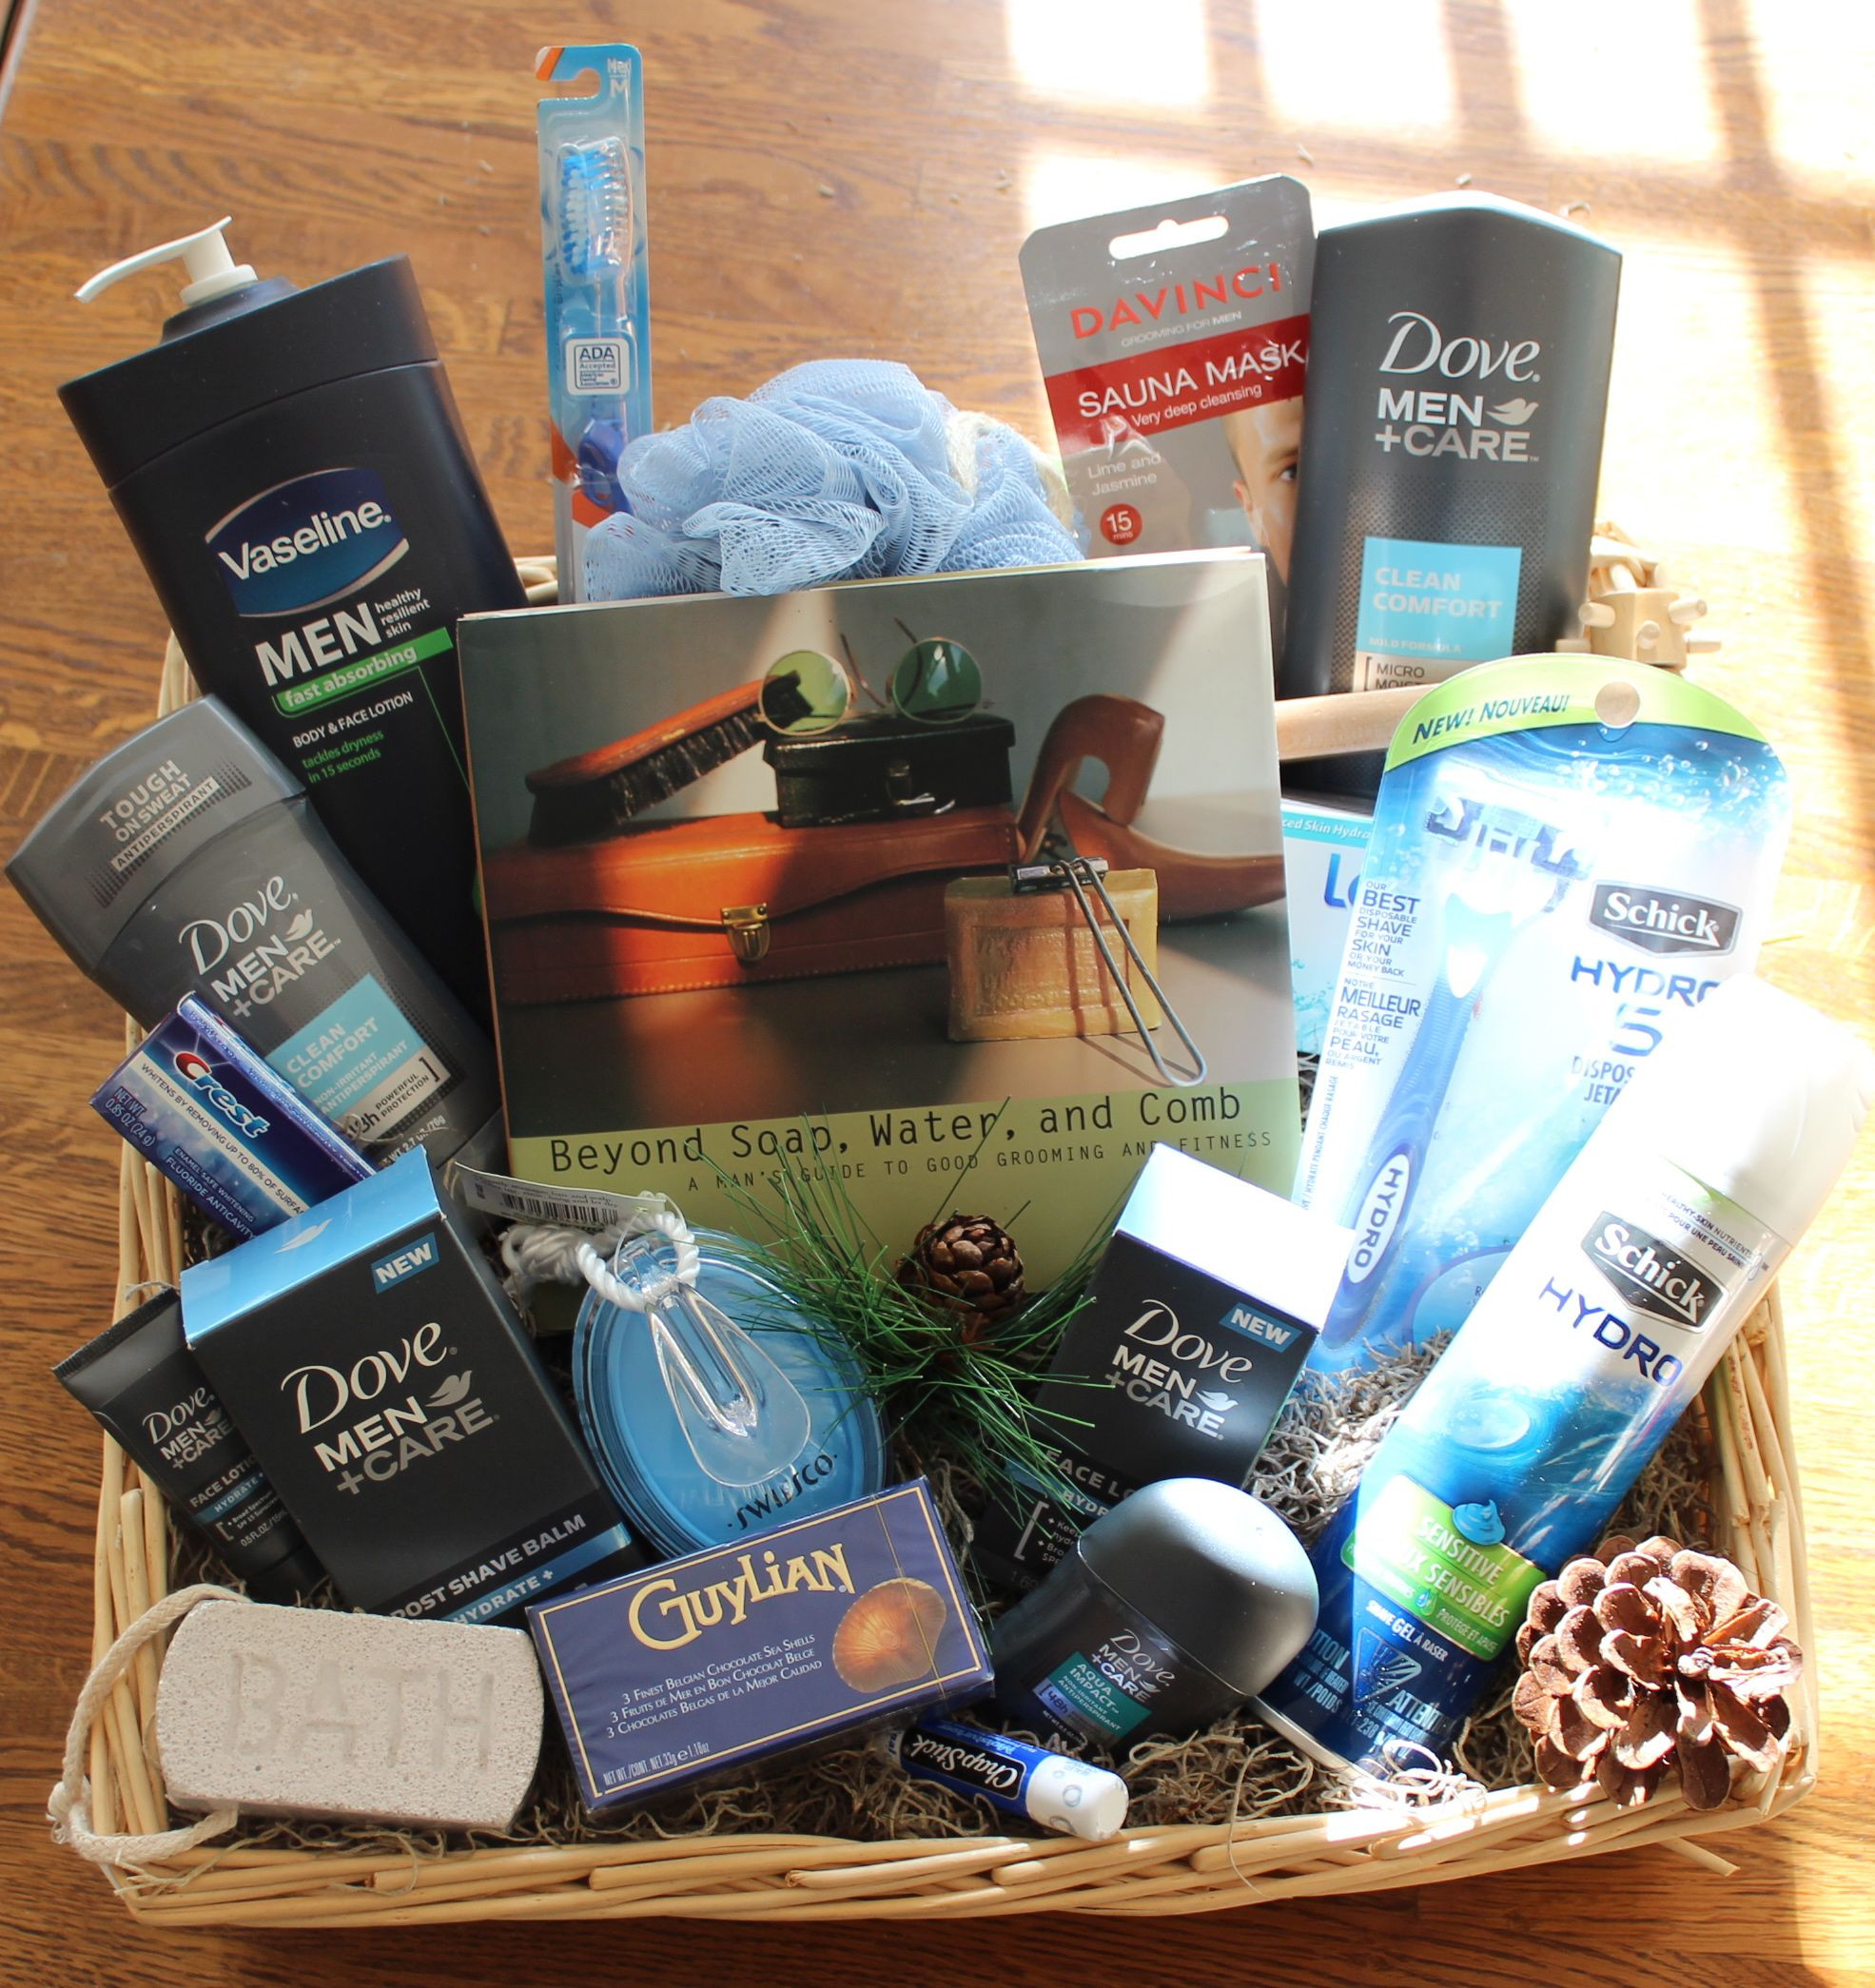 Father Day Gift Basket Ideas
 Men s grooming spa Fathers Day basket before cellophane